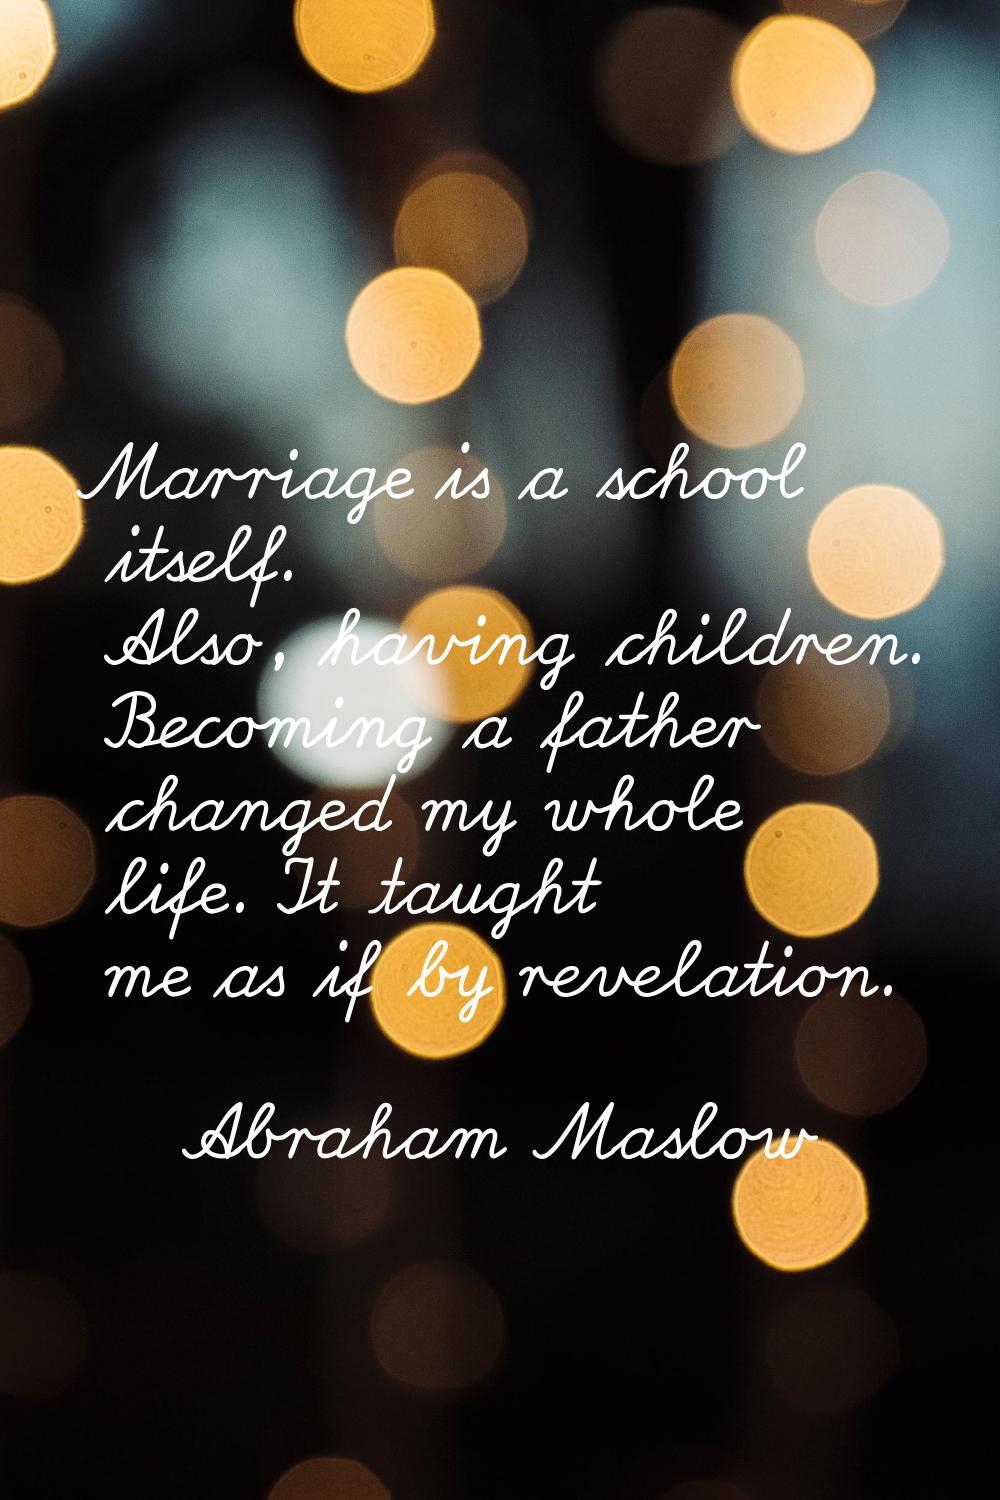 Marriage is a school itself. Also, having children. Becoming a father changed my whole life. It tau